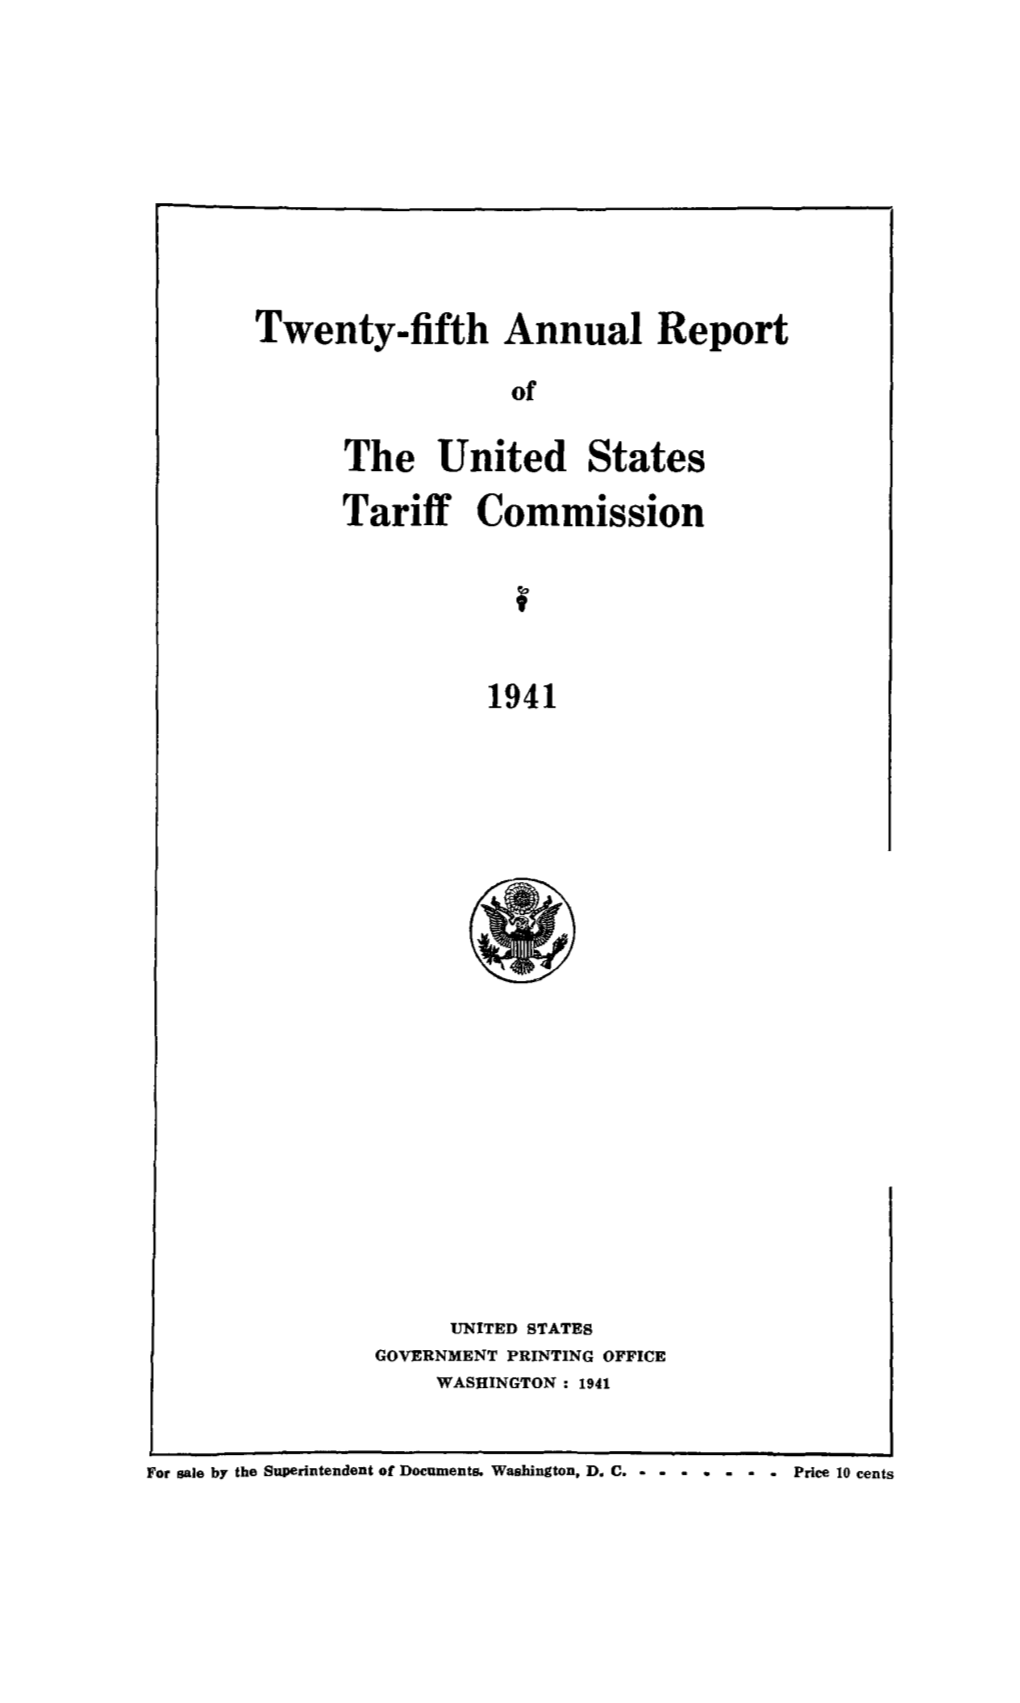 FY 1941 Annual Report